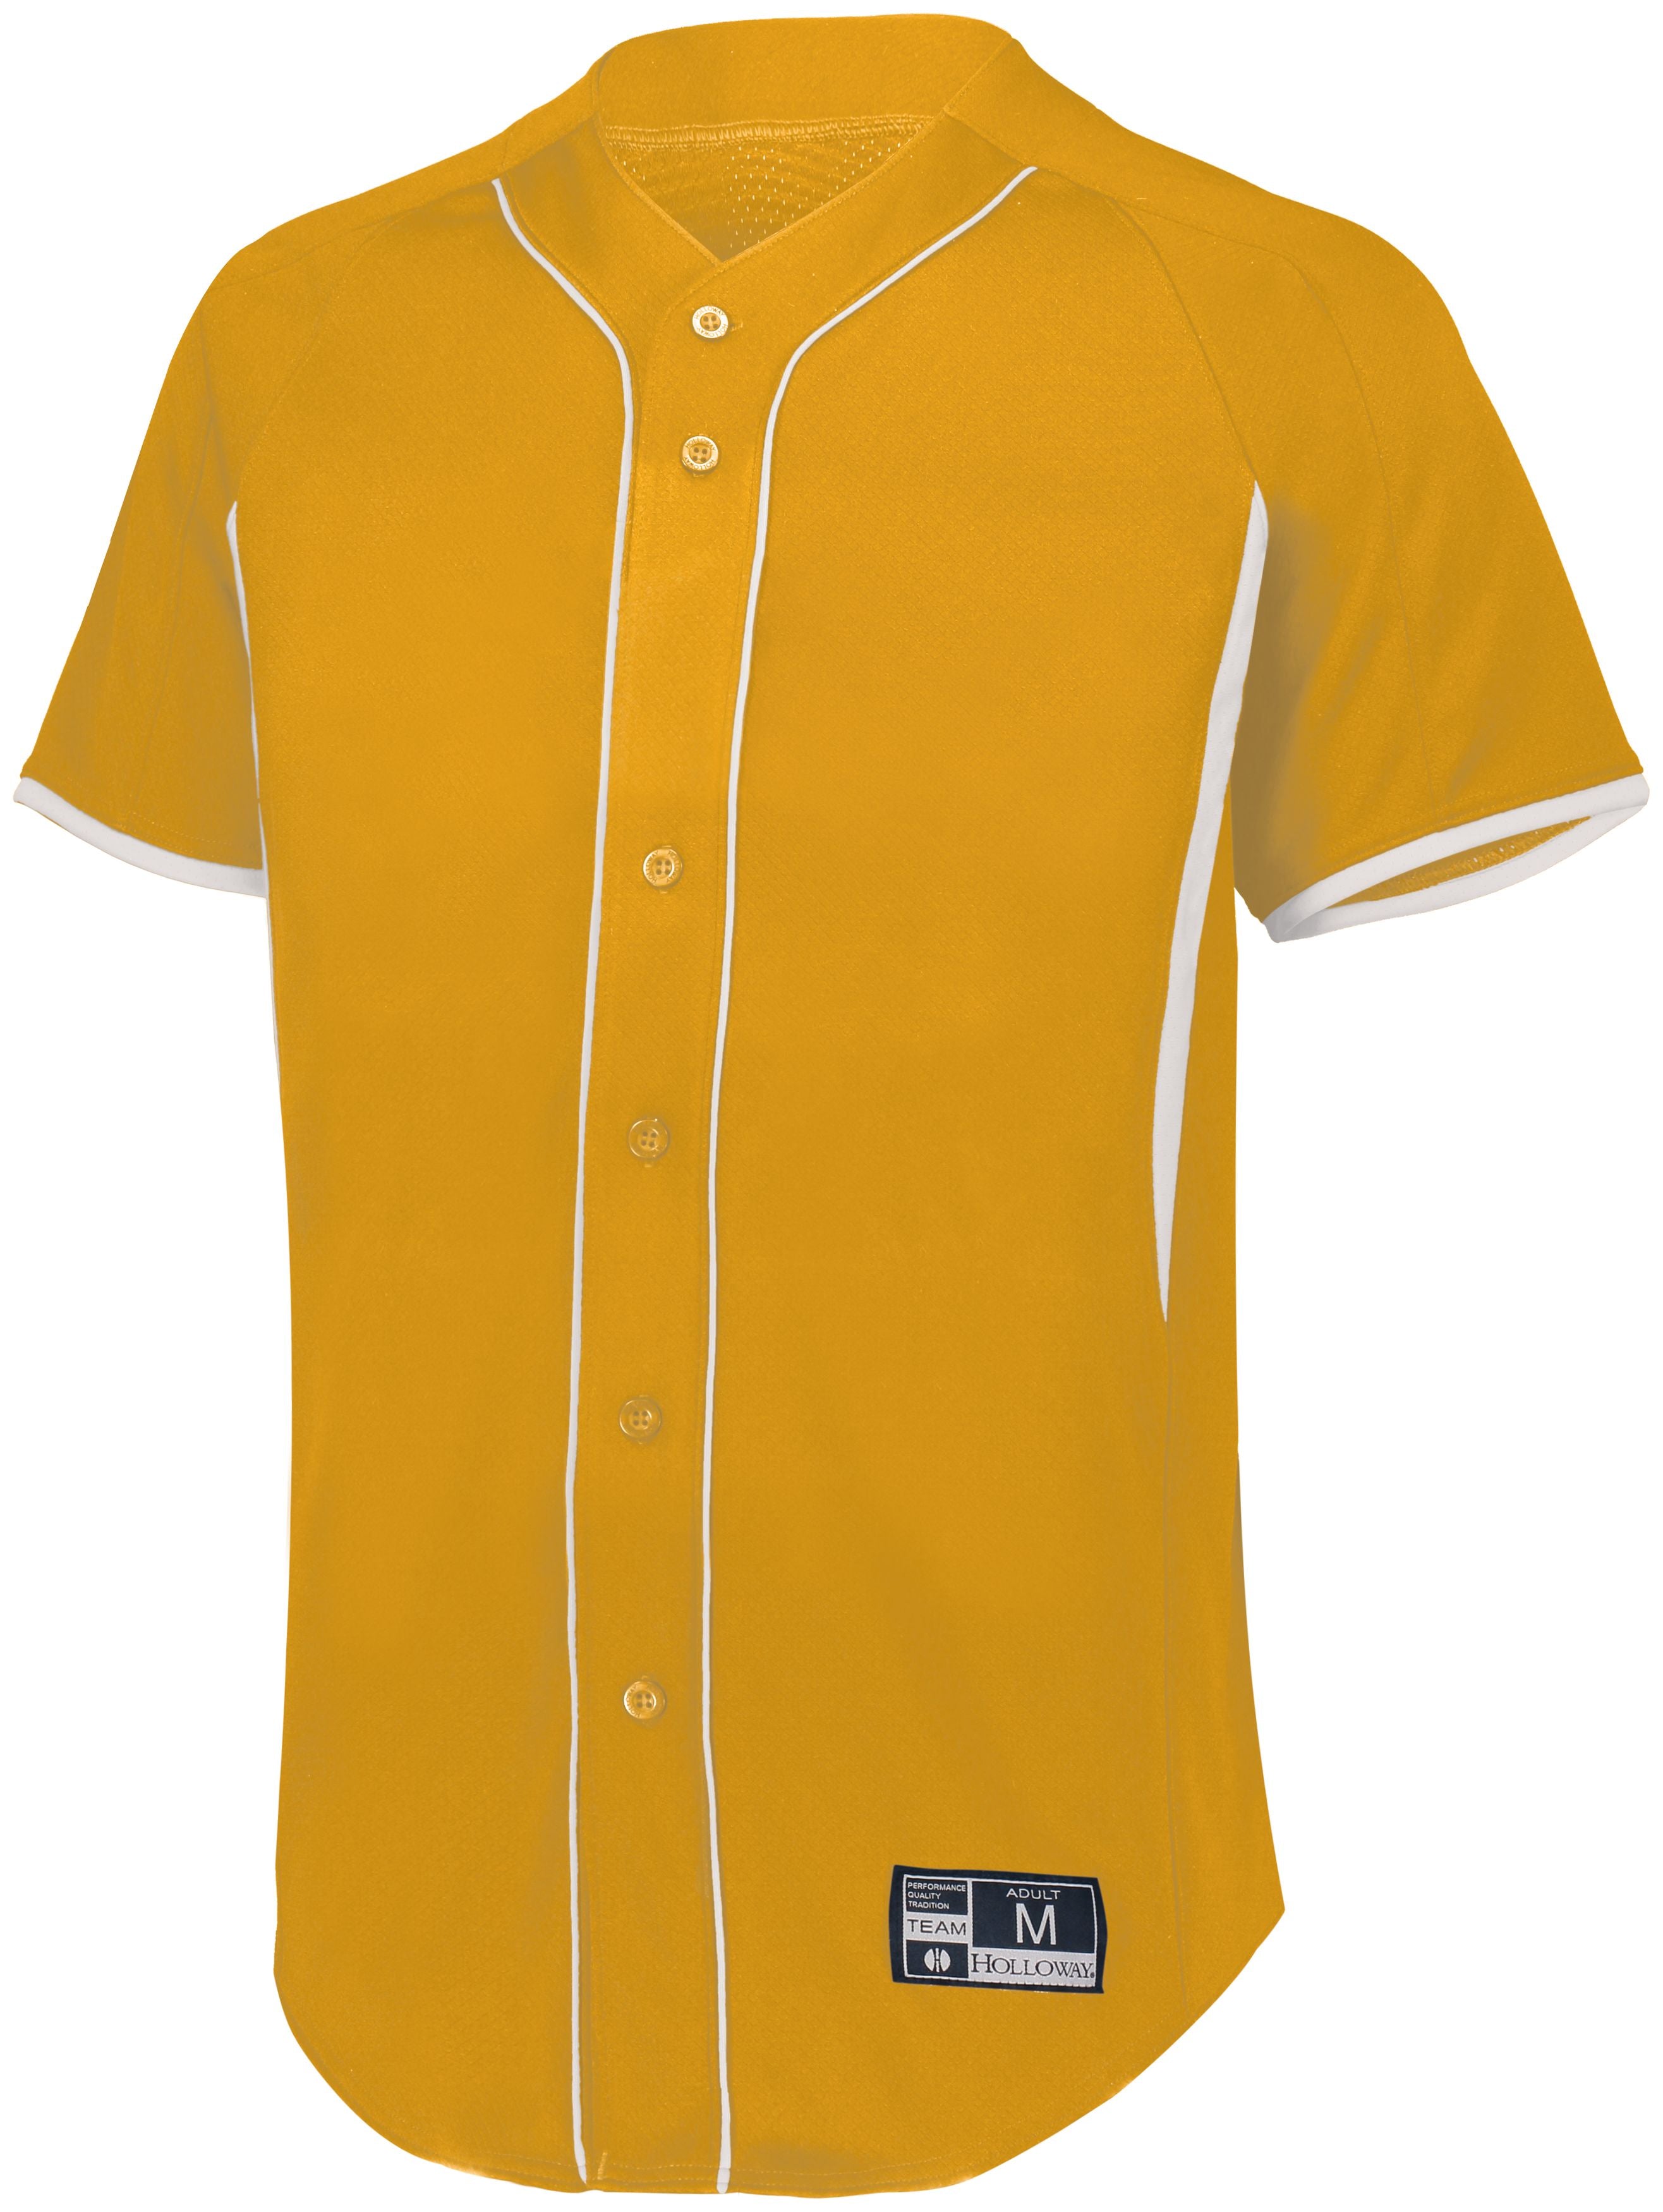 Holloway Game7 Full-Button Baseball Jersey in Light Gold/White  -Part of the Adult, Adult-Jersey, Baseball, Holloway, Shirts, All-Sports, All-Sports-1 product lines at KanaleyCreations.com